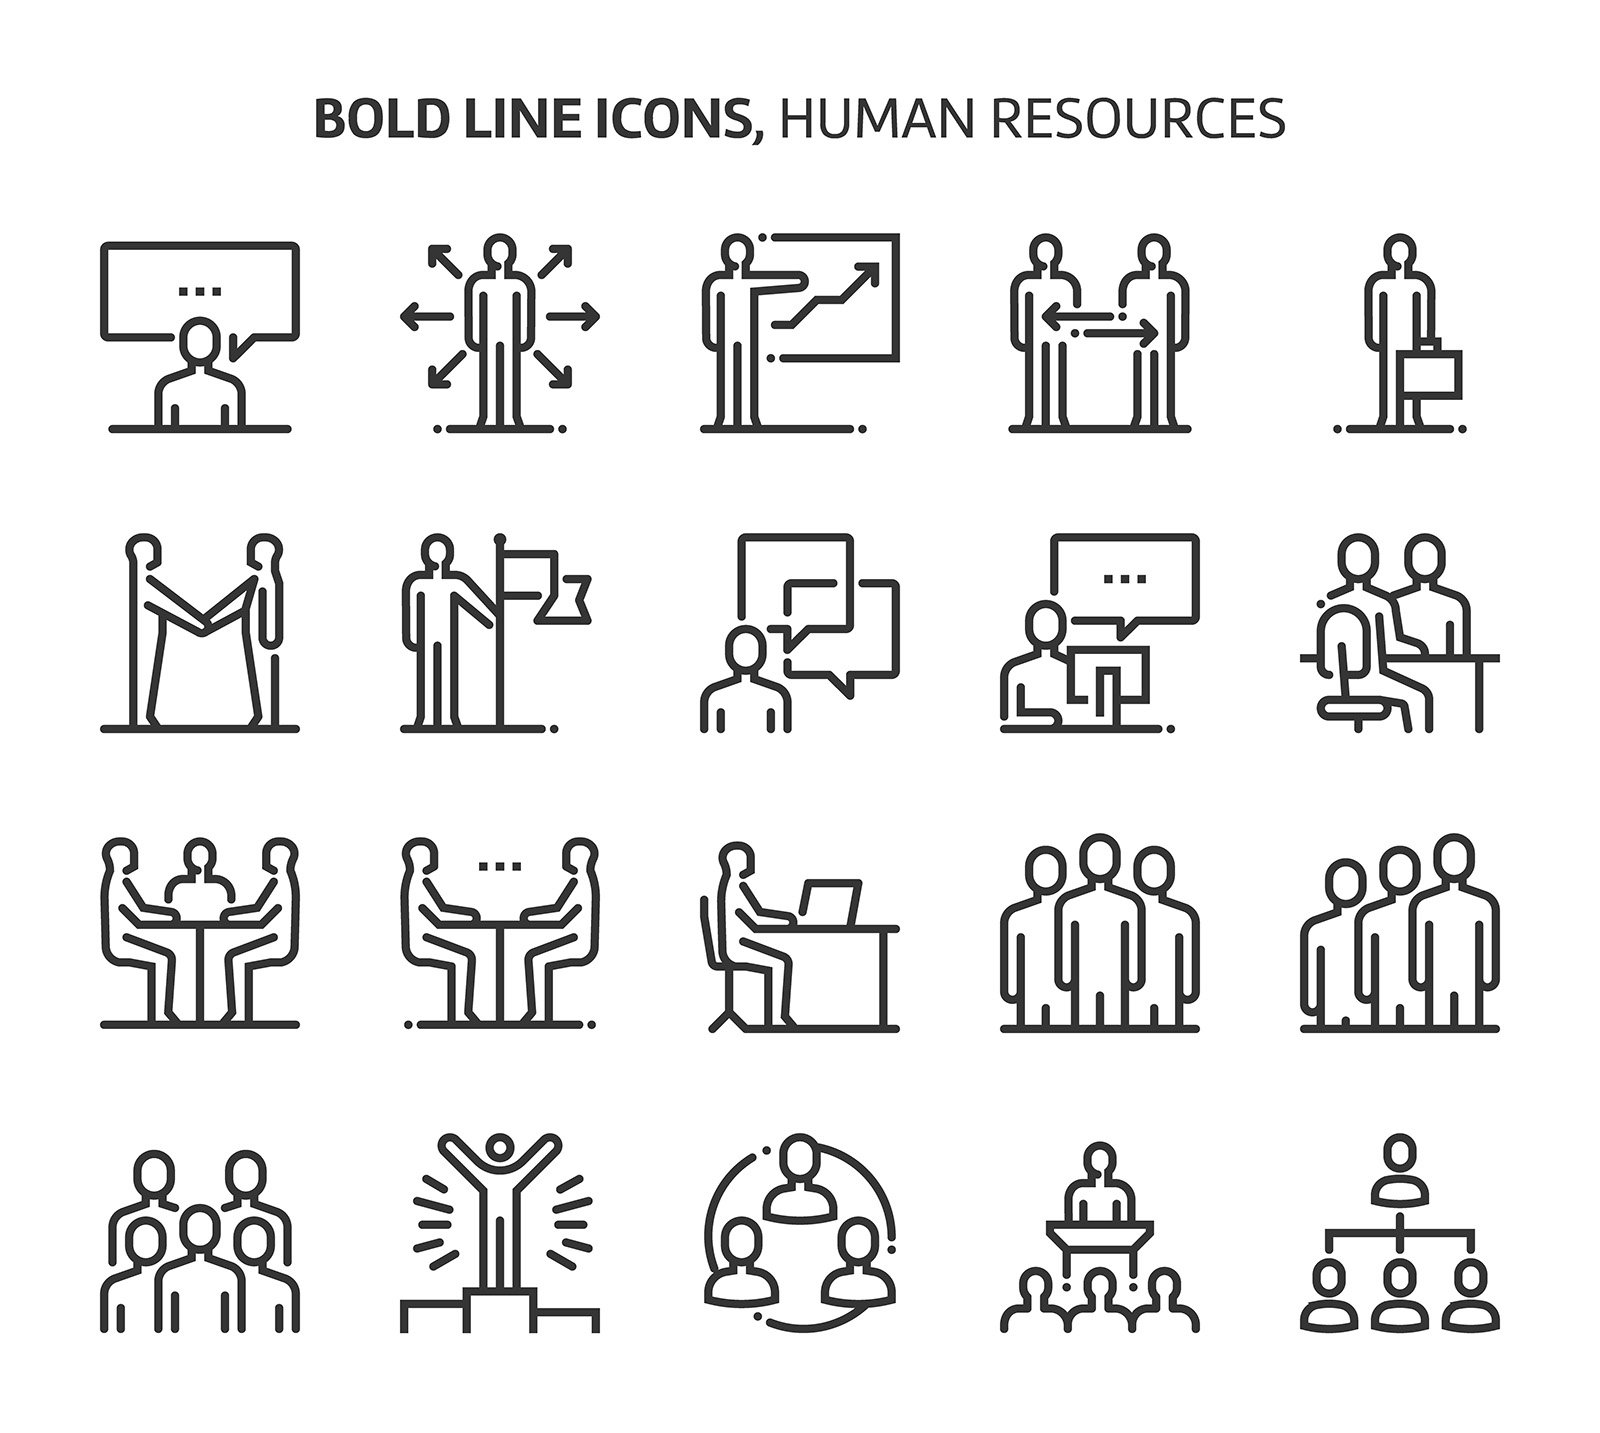 Human resources, bold line icons cover image.